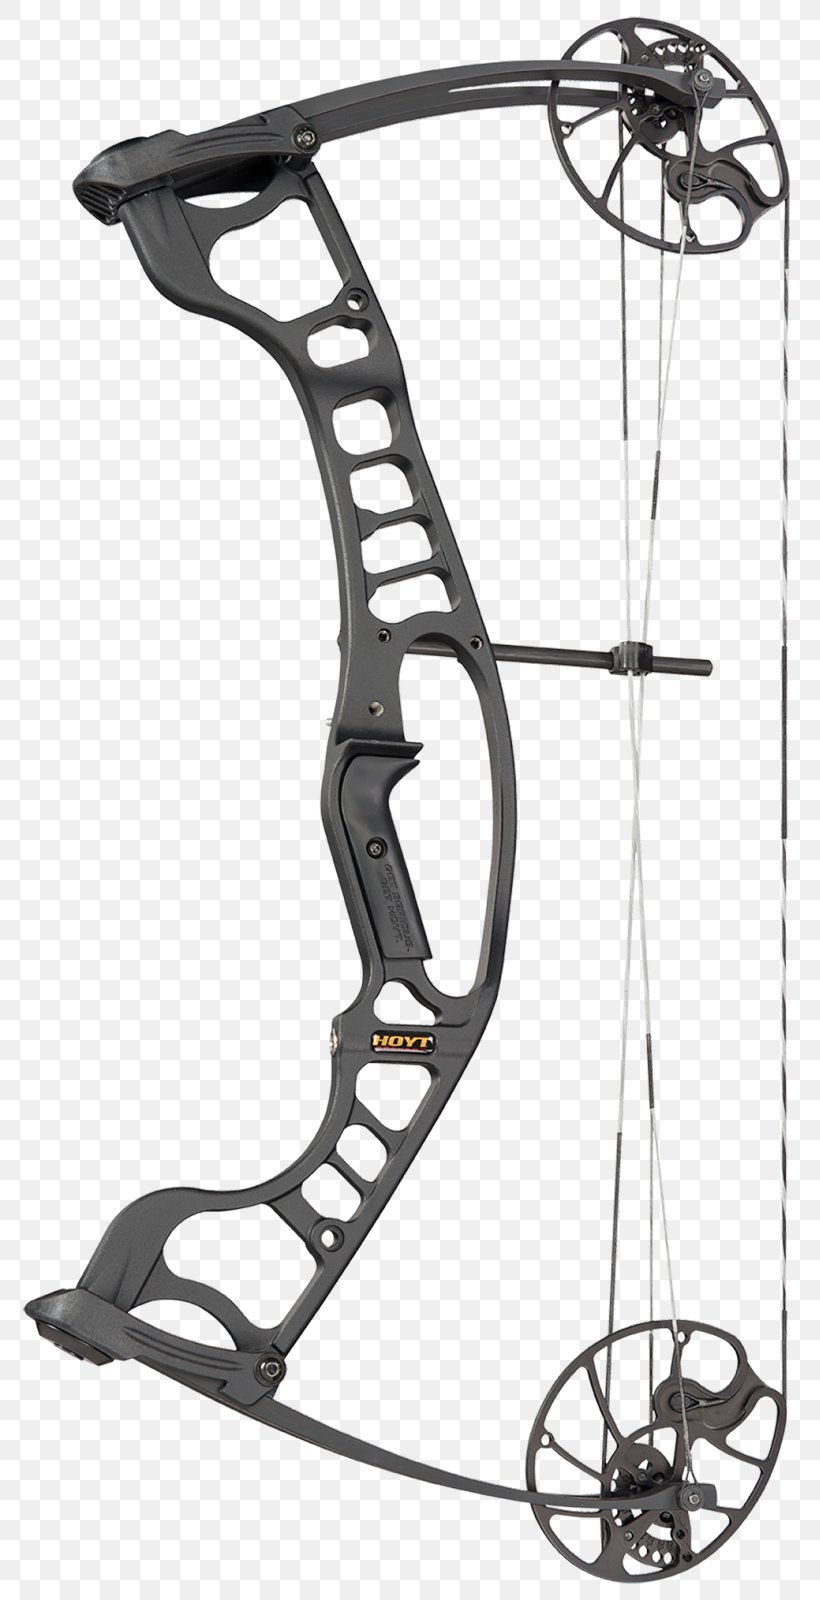 Compound Bows Bow And Arrow Bowhunting PSE Archery, PNG, 789x1600px, Compound Bows, Abbey Archery Pty Ltd, Archery, Auto Part, Bicycle Accessory Download Free